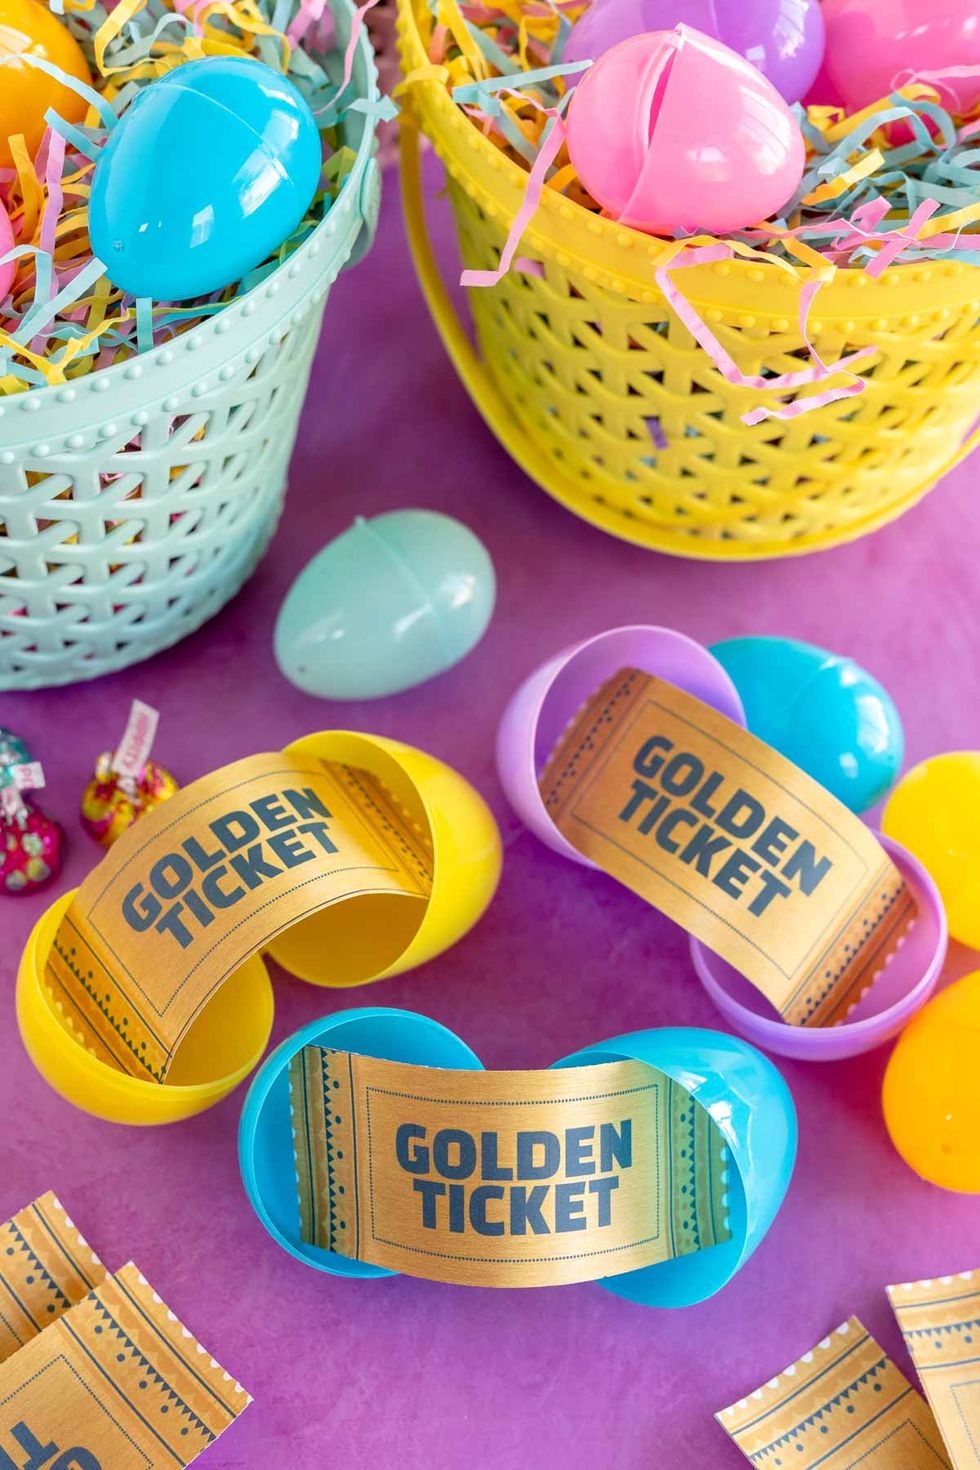 Easter Eggs - The Hunt Made Easy